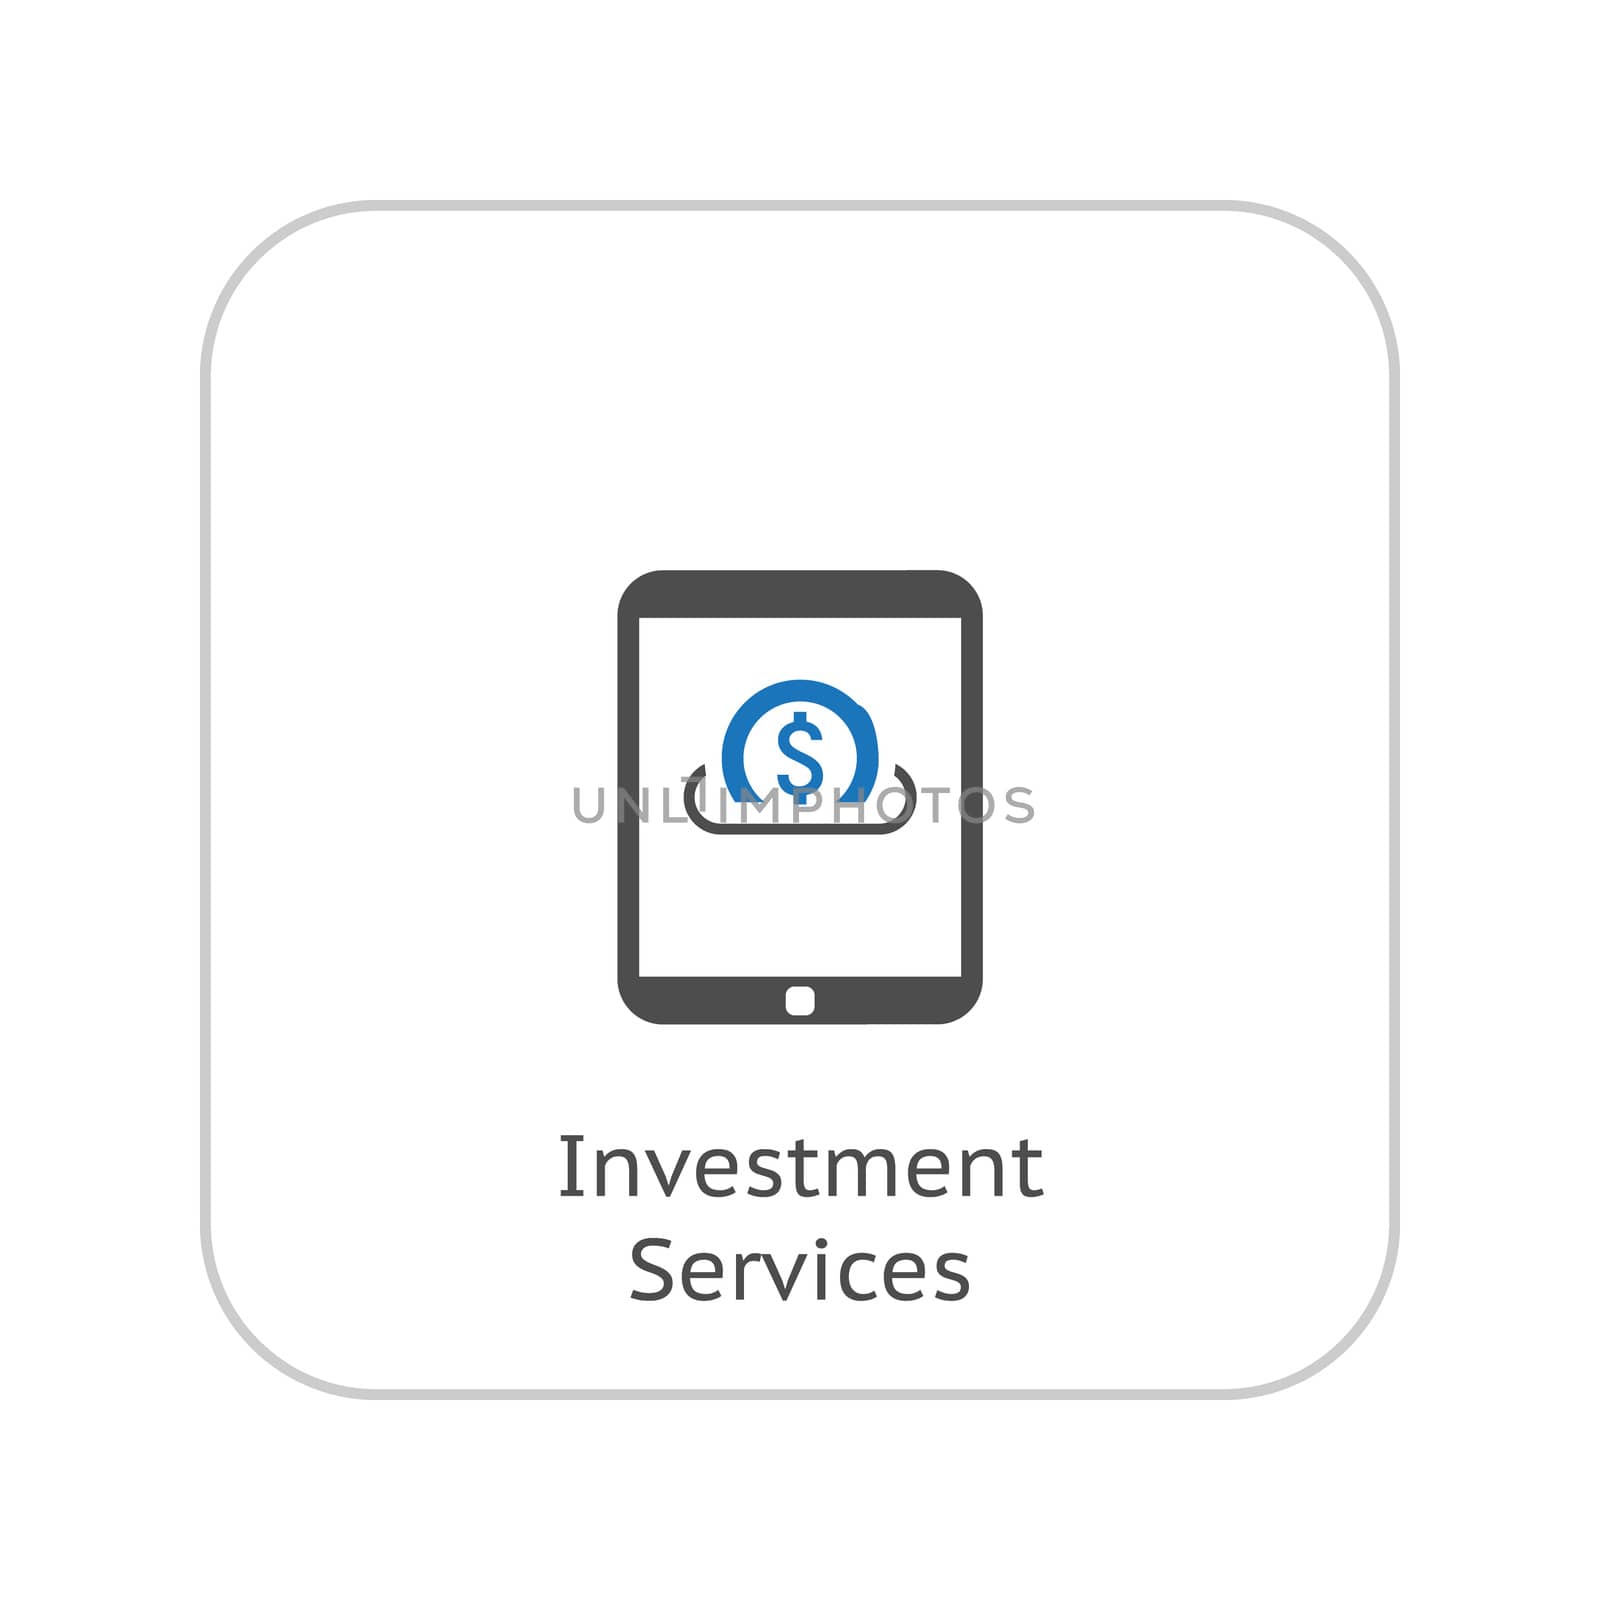 Flat Design Investment Services Icon. Isolated Illustration. by WaD